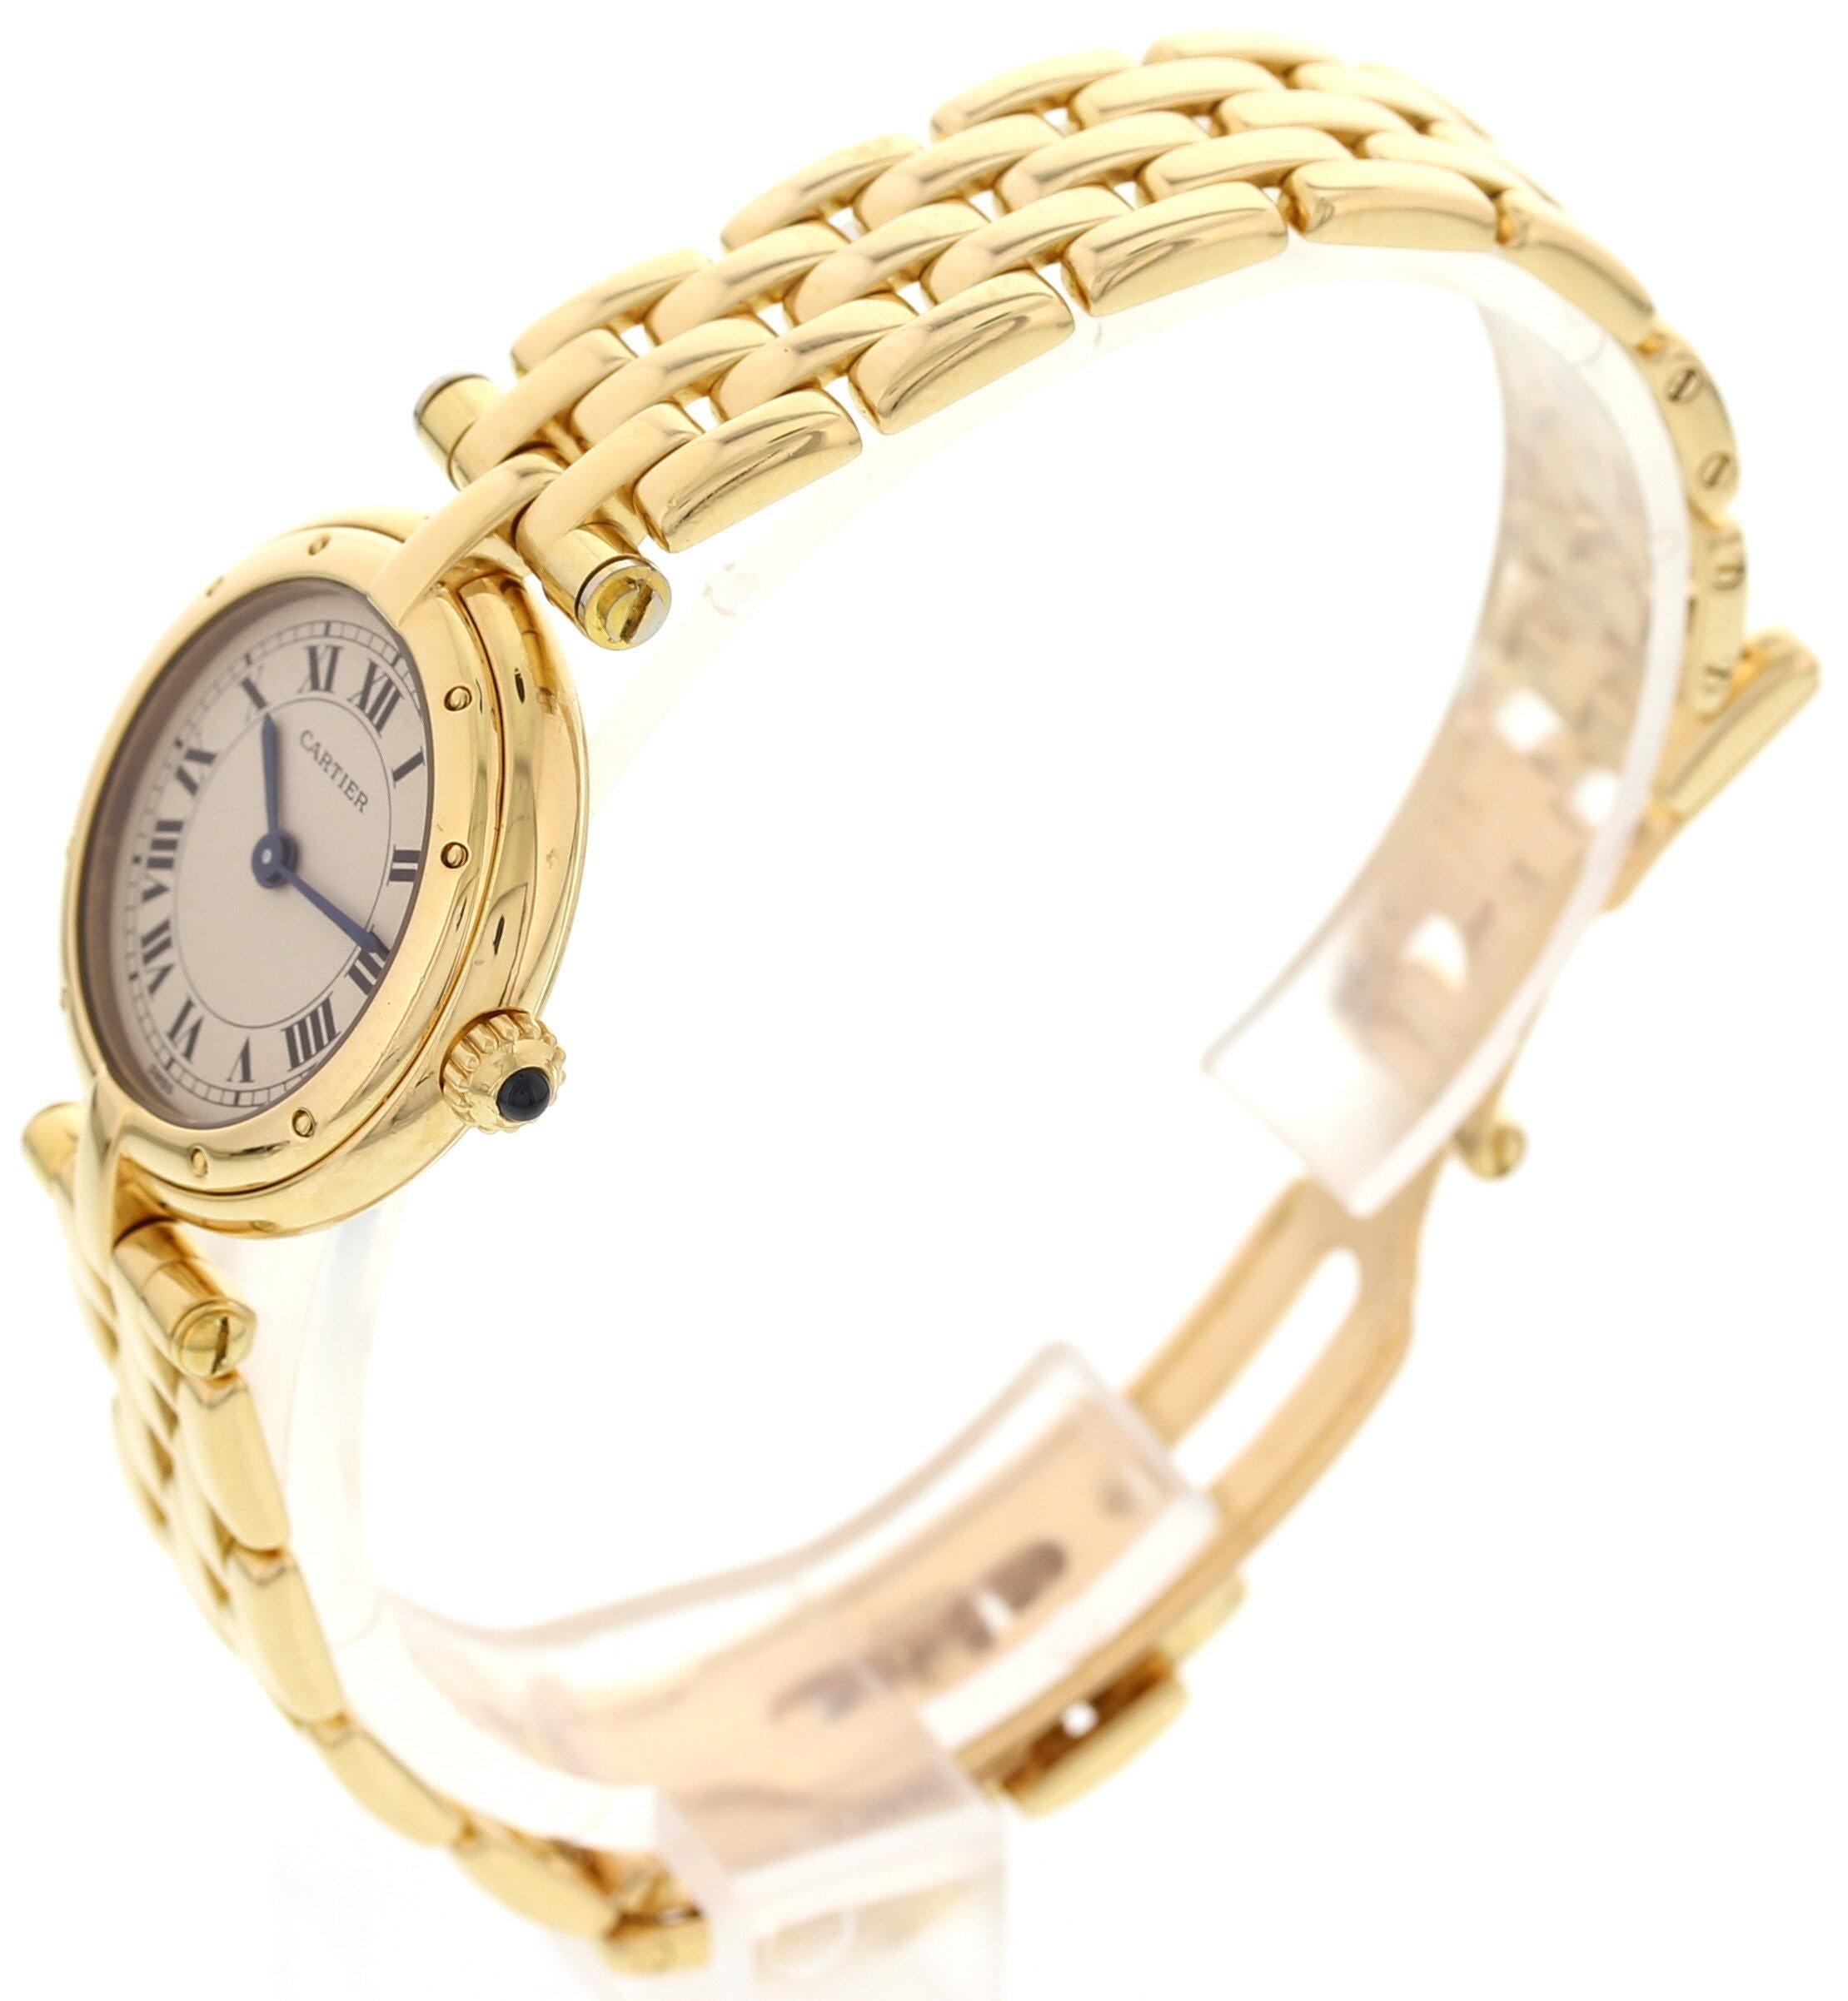 Ladies Cartier Cougar watch. 23 mm 18k yellow gold case. 18k yellow gold bezel. White dial with blue hands and black Roman numerals. Water resistant. 18k yellow gold bracelet with hidden double folding clasp; will fit a 5.5 inch wrist. Quartz